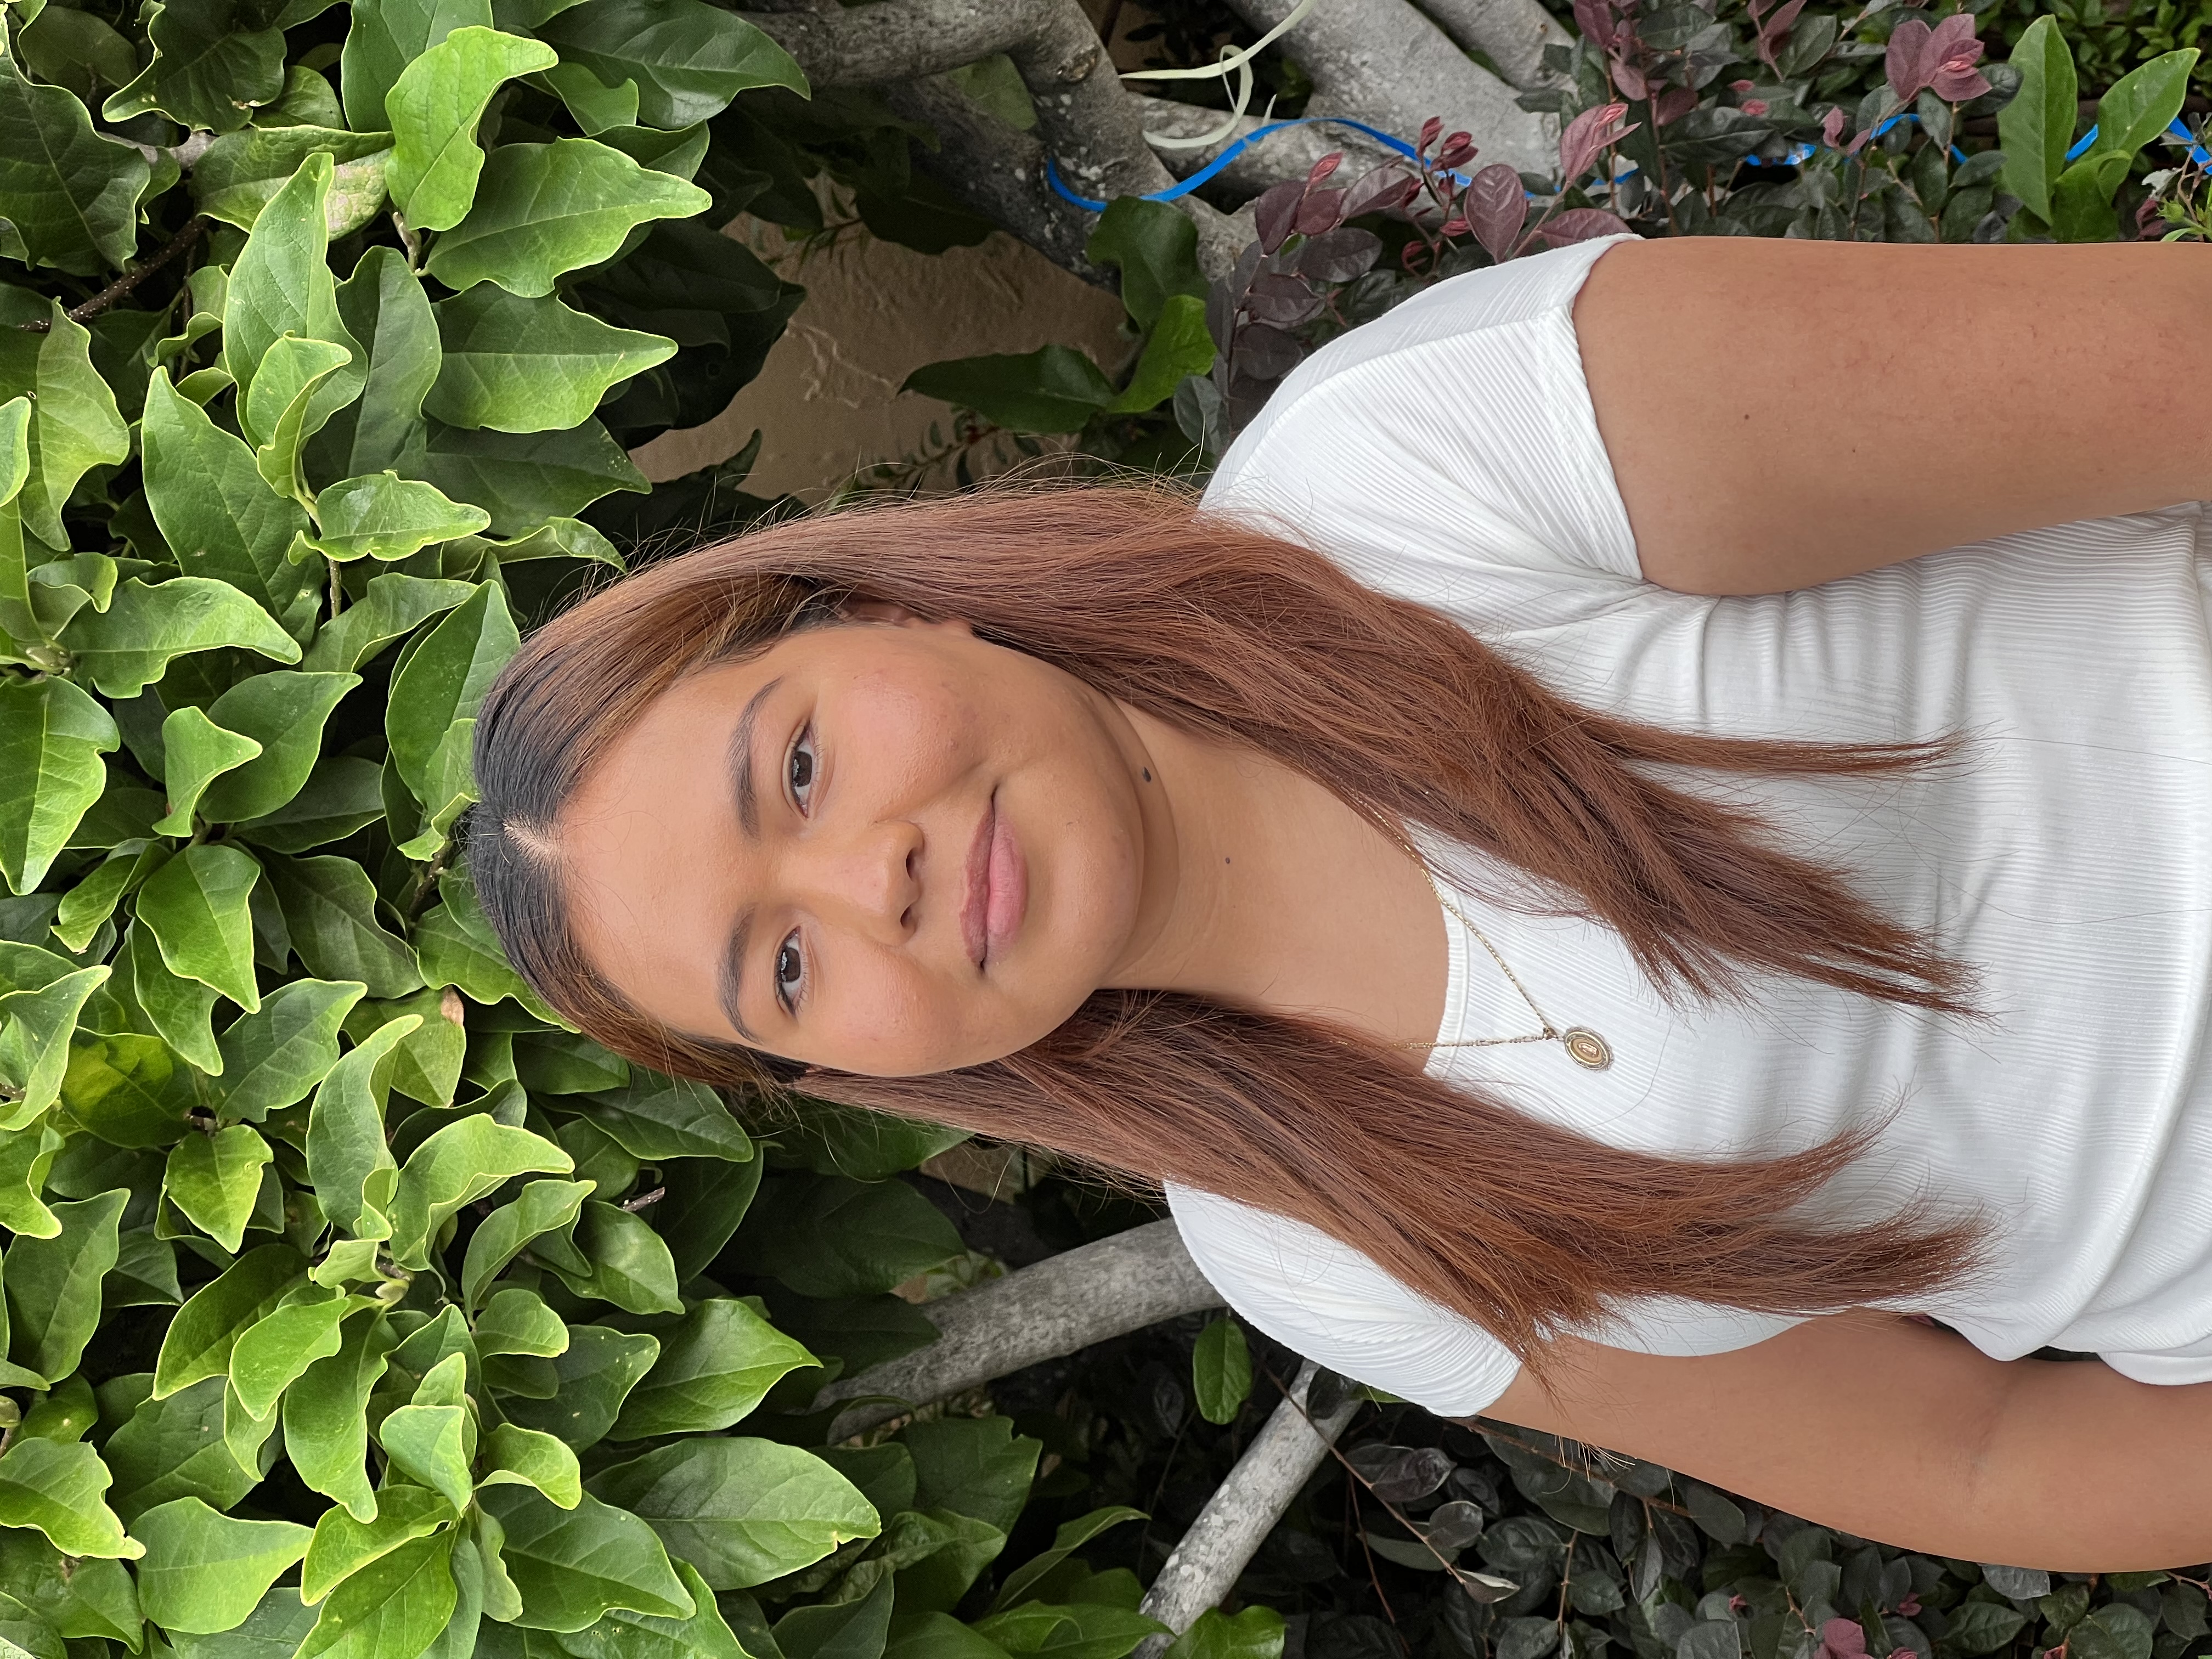 Hispanic woman in her twenties, with long, brown hair, wearing a white t-shirt and gold necklace smiling in front of green tree.